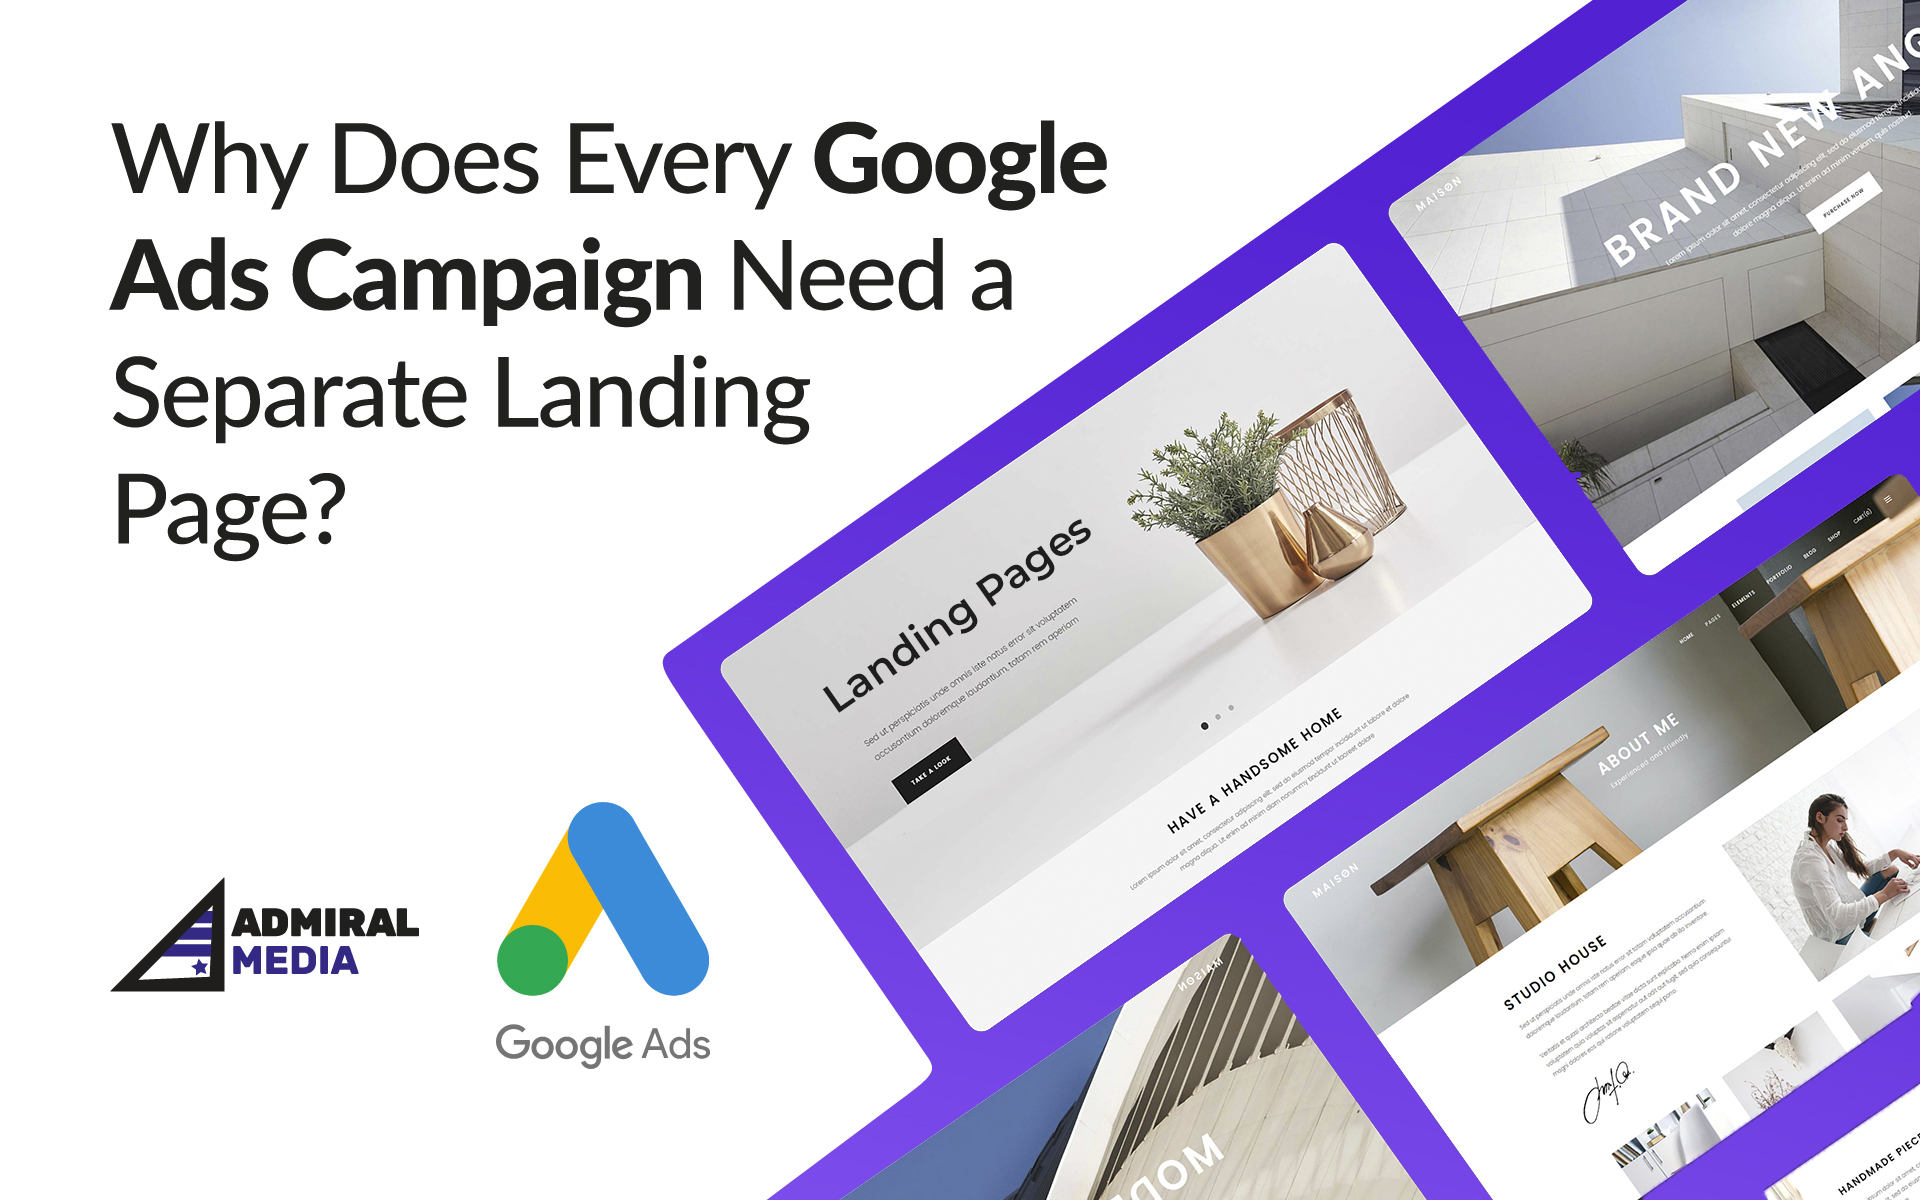 Need to Run Google Ads? Here’s What You Should Include In Your Landing Pages - Importance of Mobile-Friendly Landing Pages